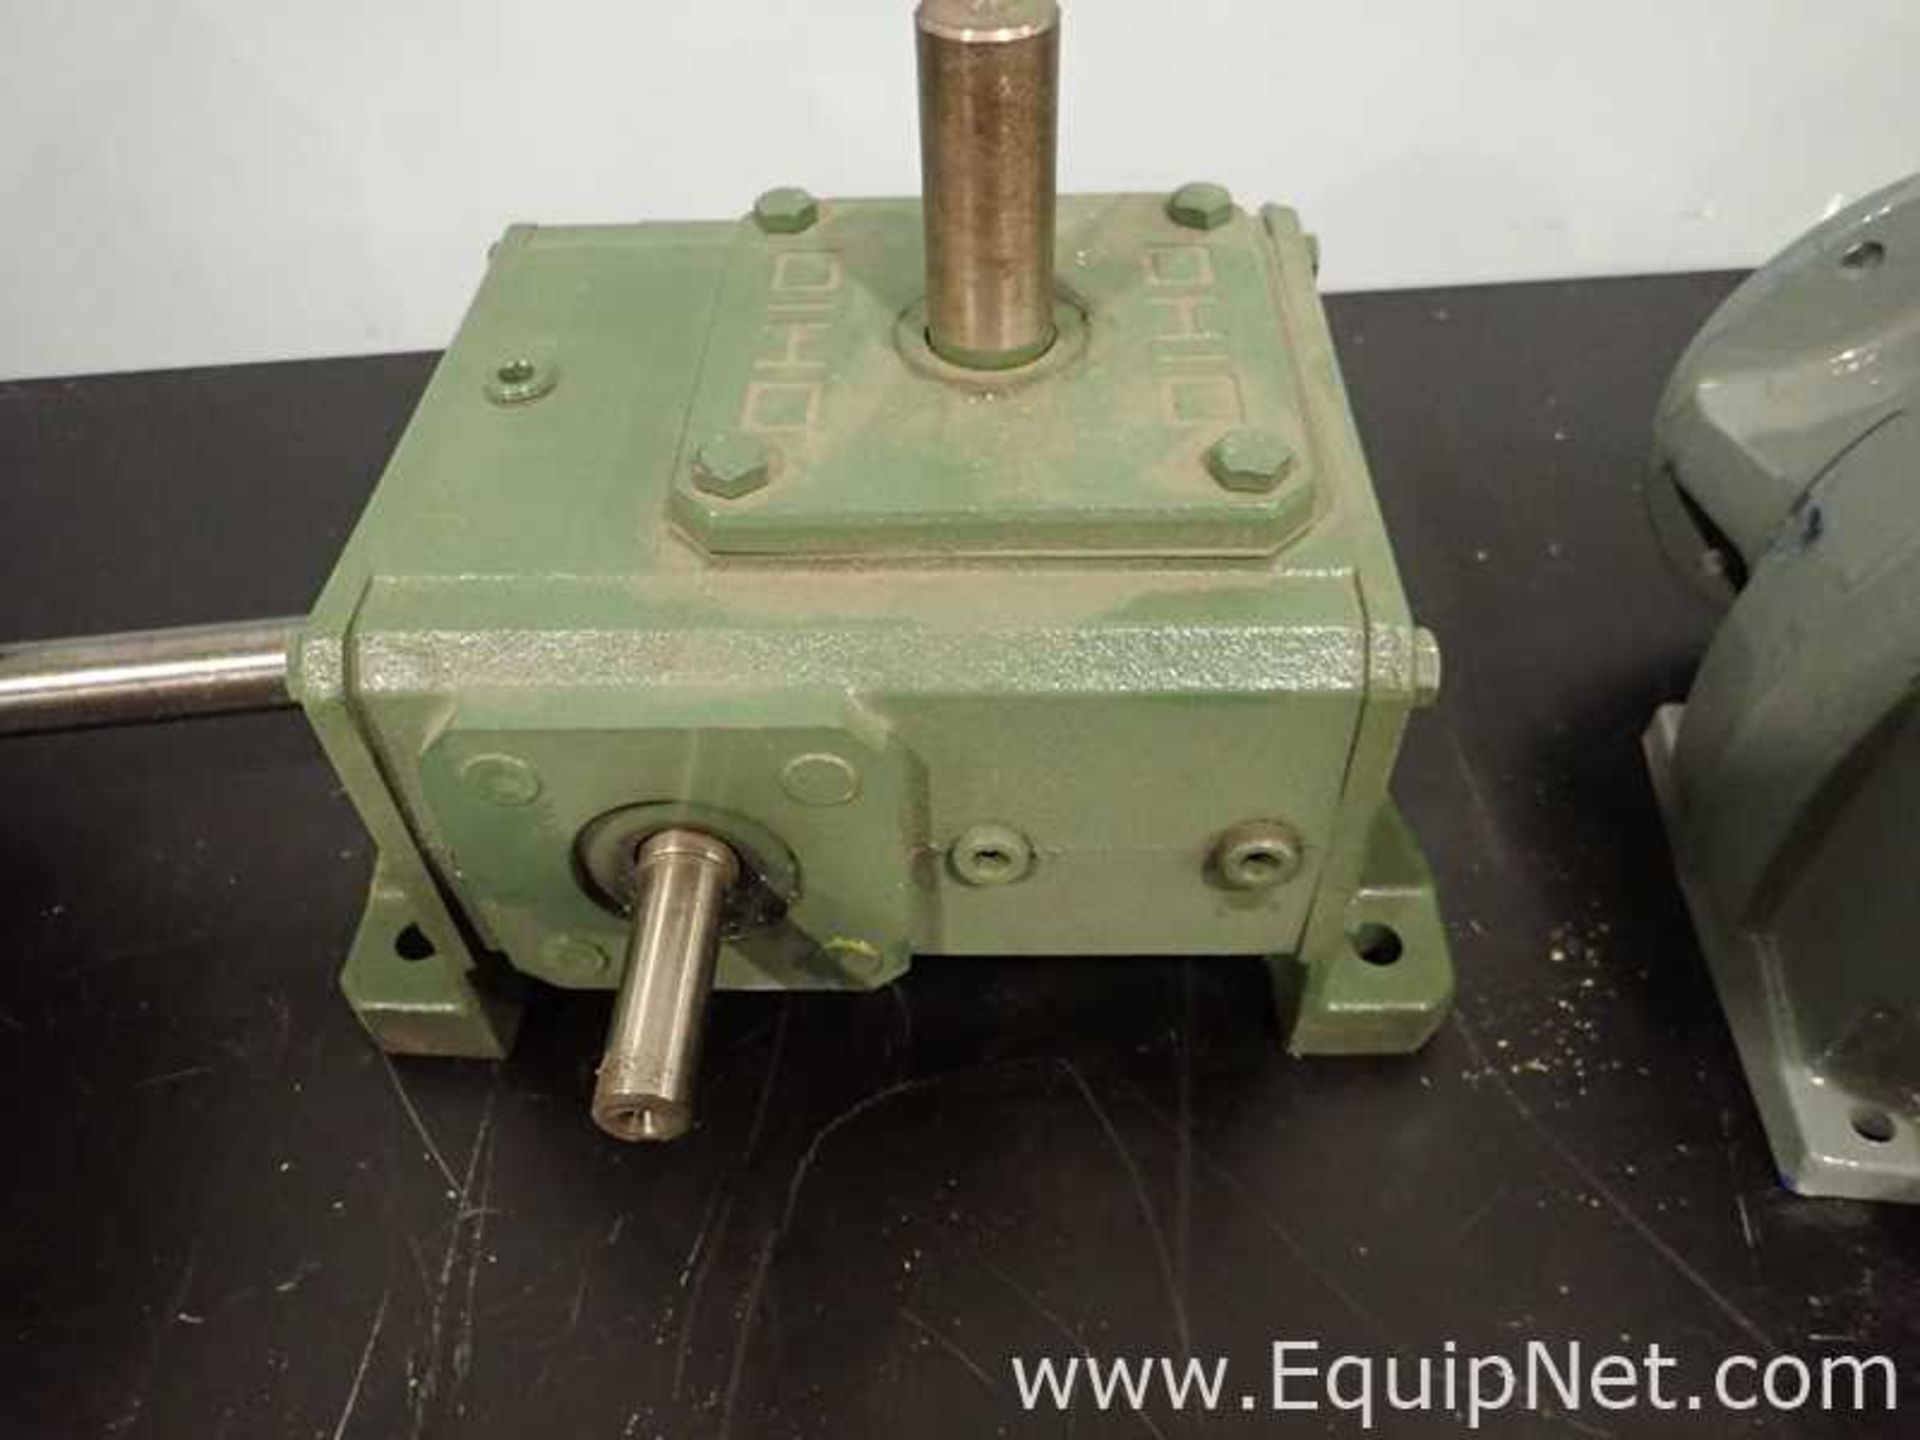 EQUIPNET LISTING #793447; REMOVAL COST: $25; DESCRIPTION: Lot of 6 Various Gear BoxesLot - Image 10 of 13